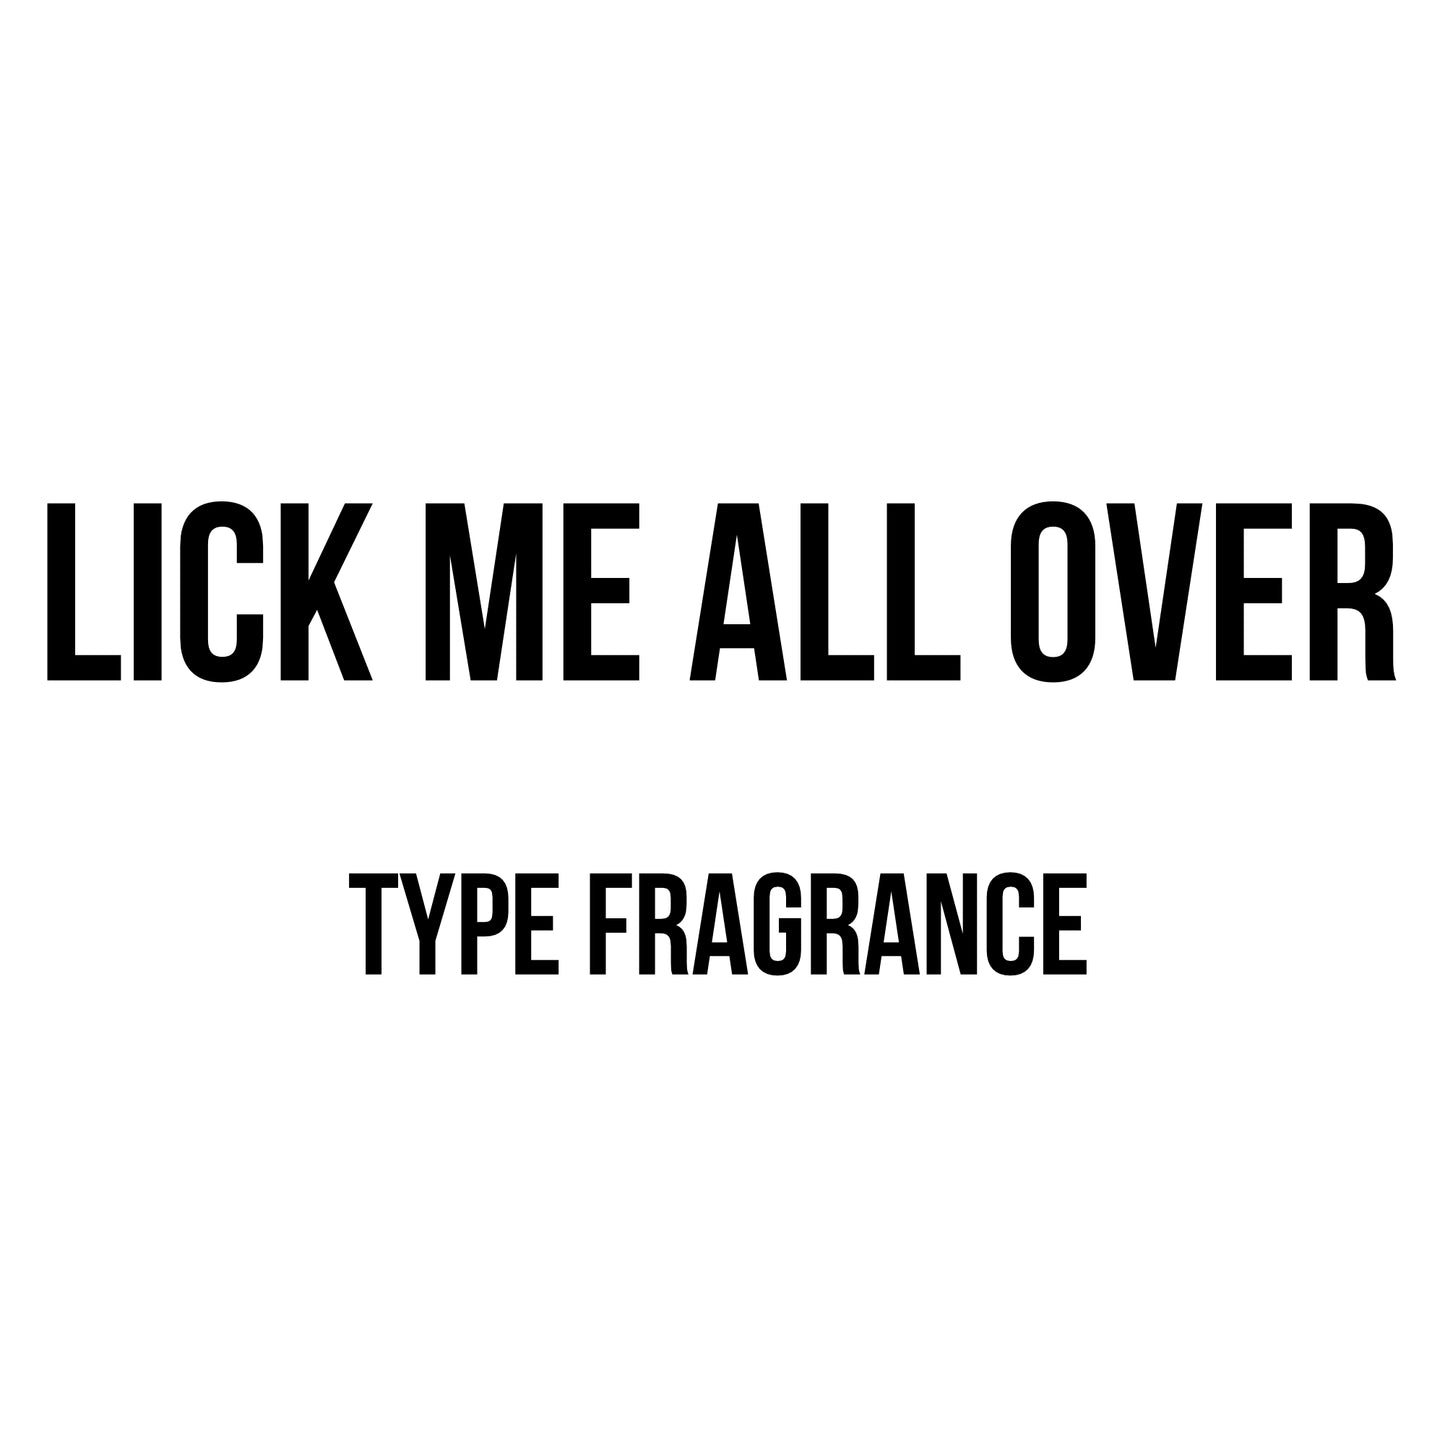 Lick Me All Over Type Fragrance